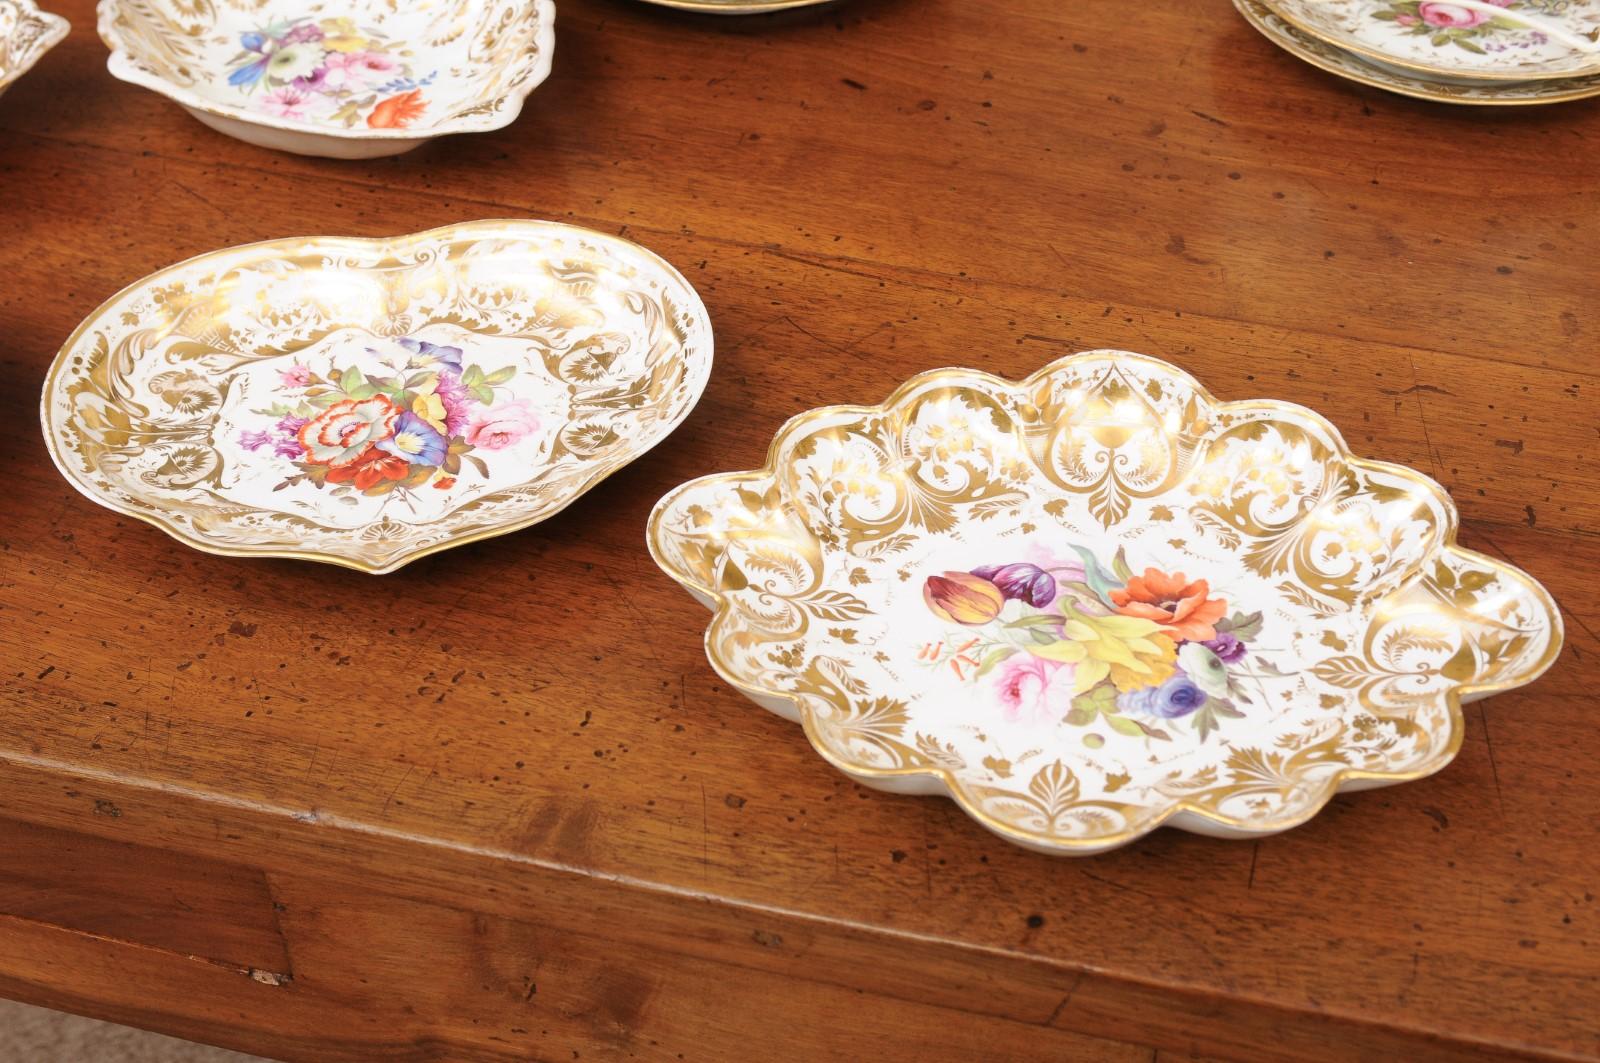 Set of Early 19th Century English Derby Porcelain Dessert Service For Sale 5